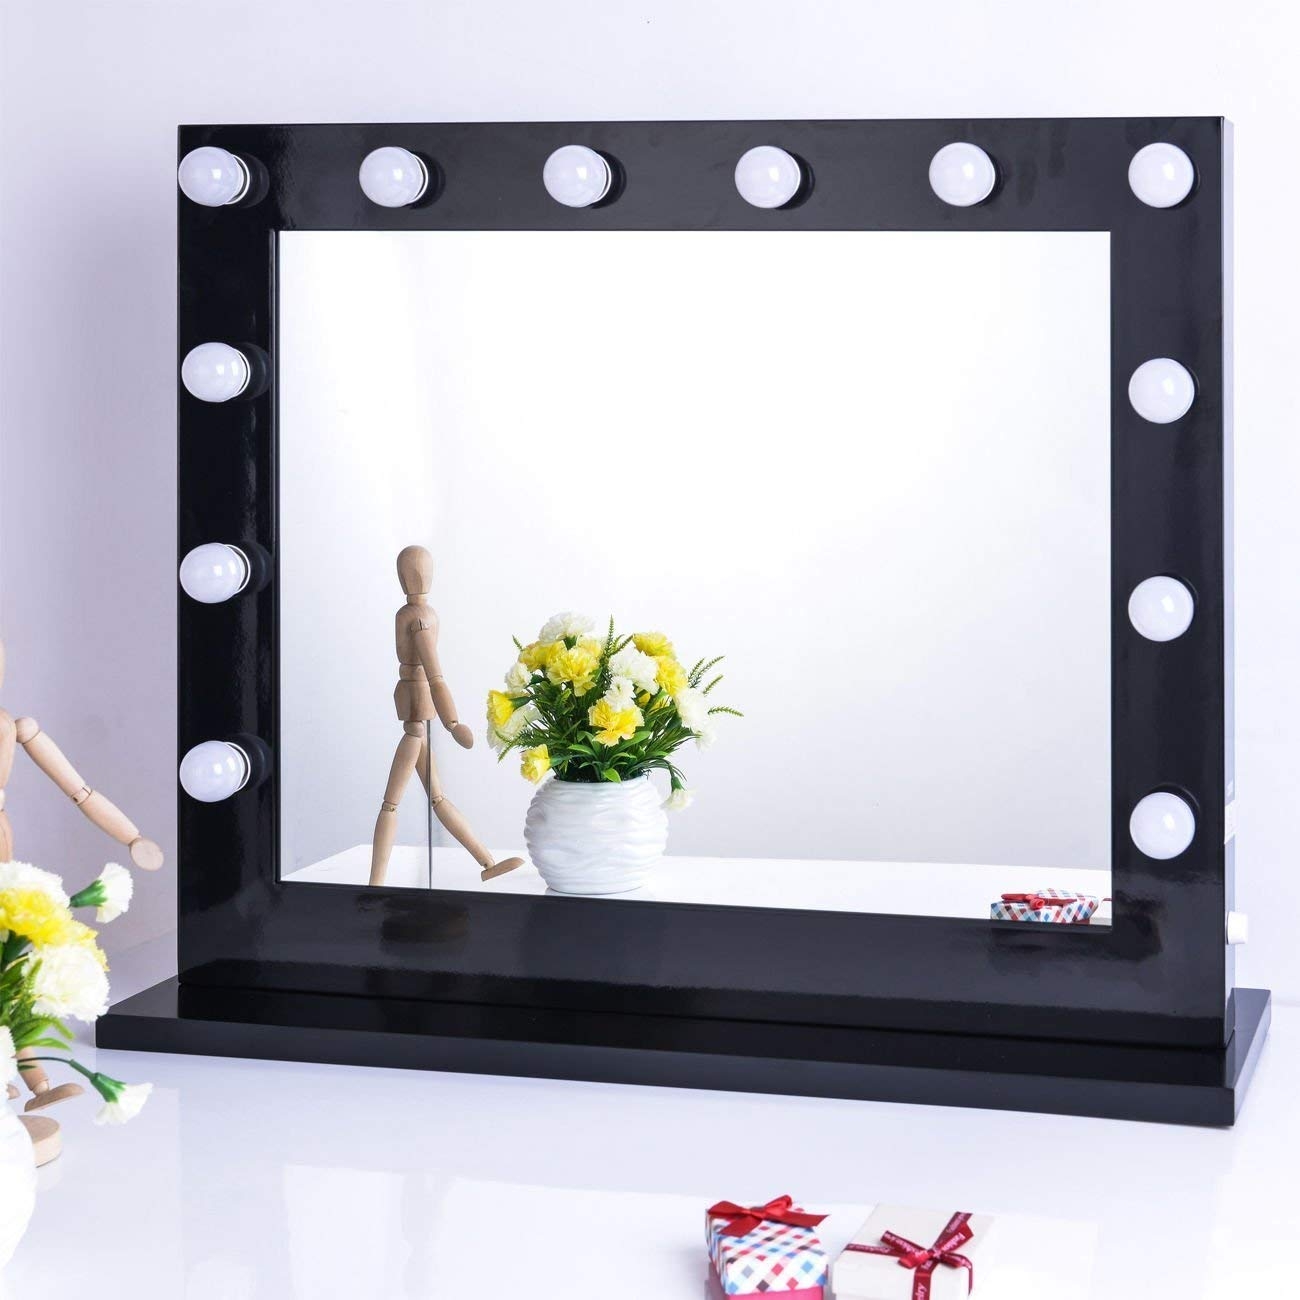 Led Vanity Mirror You Ll Love In 2021, Illuminated Wall Mounted Makeup Mirror